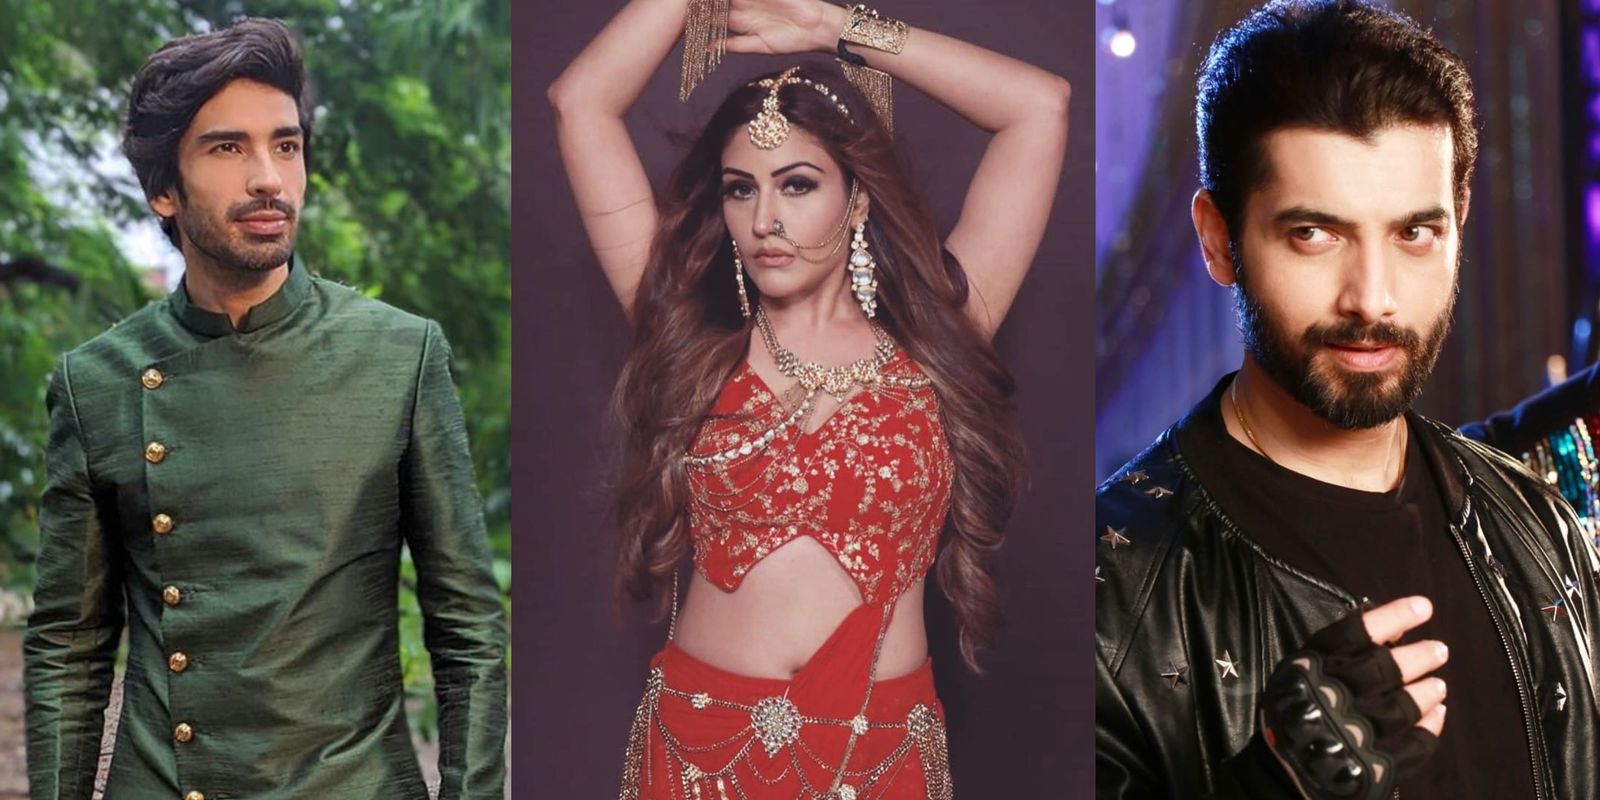 Naagin 5’s Surbhi Chandna On Co-Stars Mohit Sehgal, Sharad Malhotra: ‘Blessed To Be Working With Two Hotties’